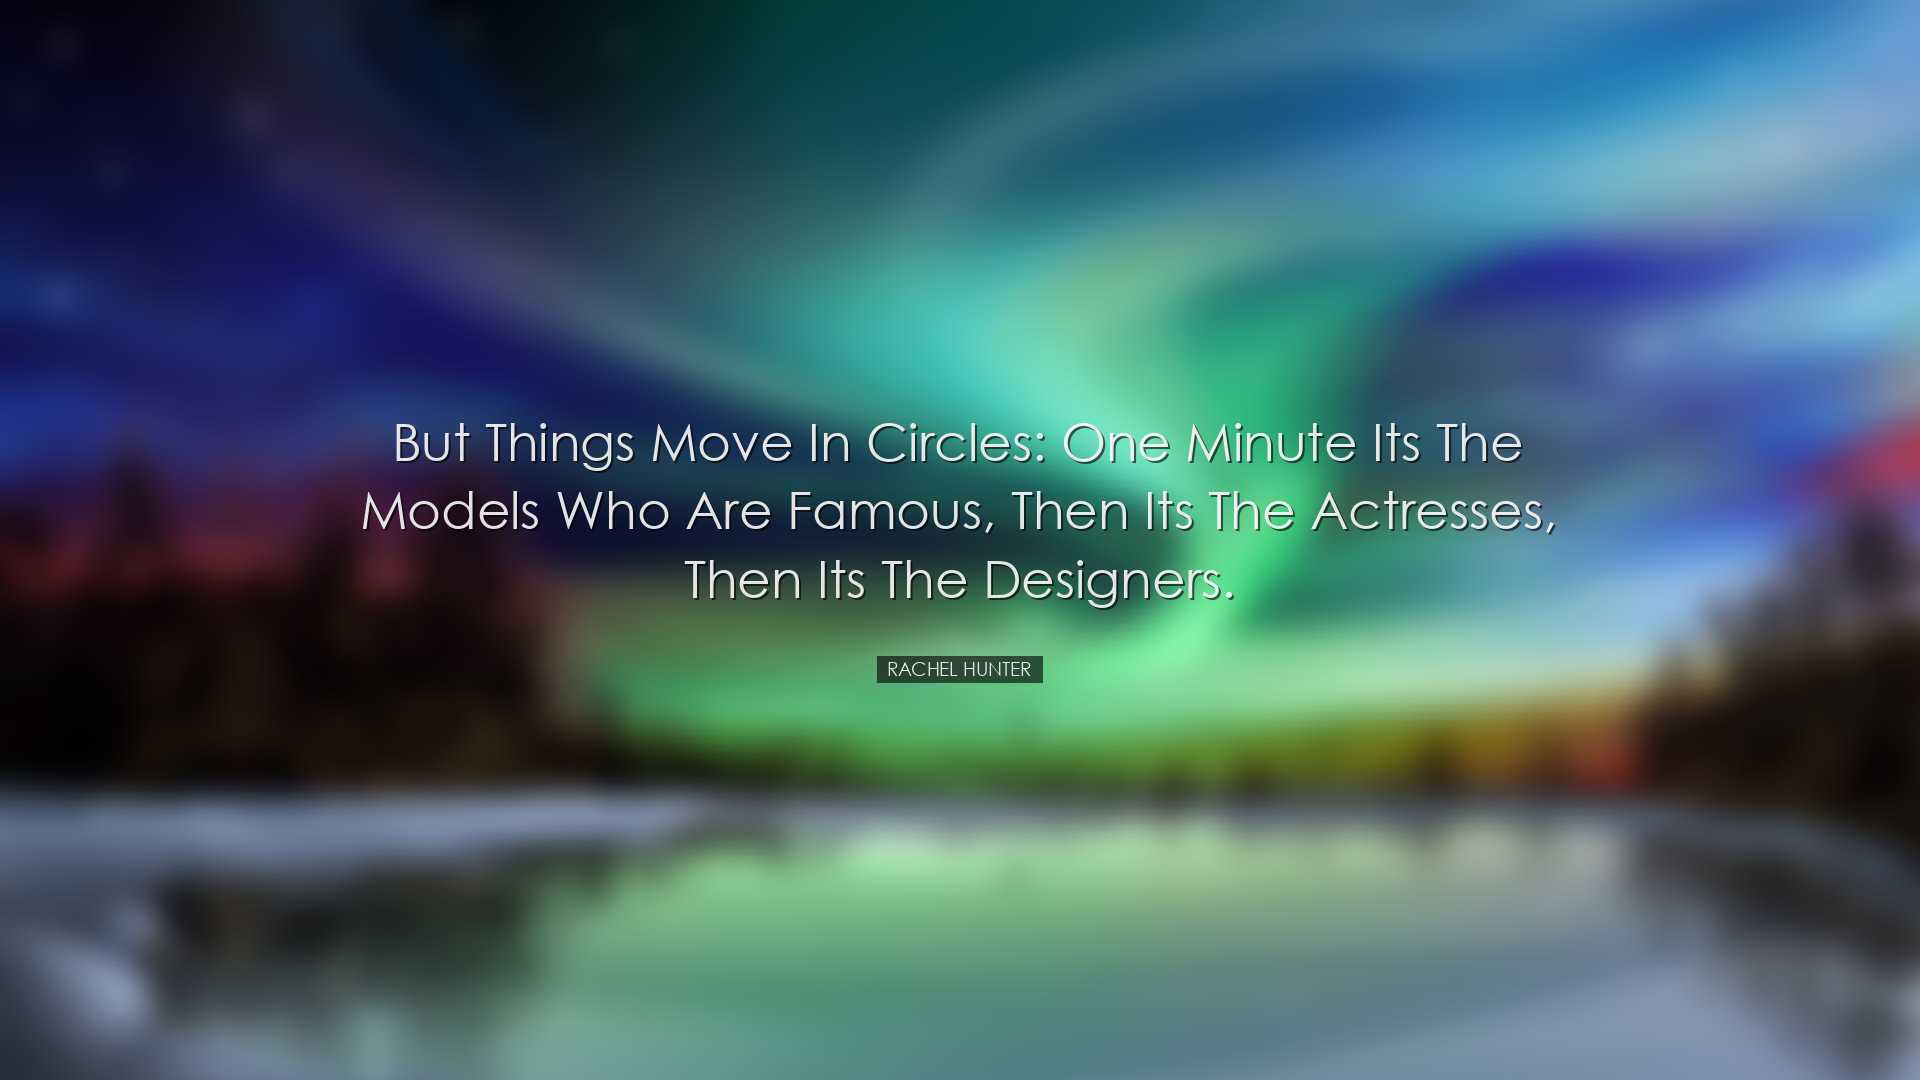 But things move in circles: one minute its the models who are famo